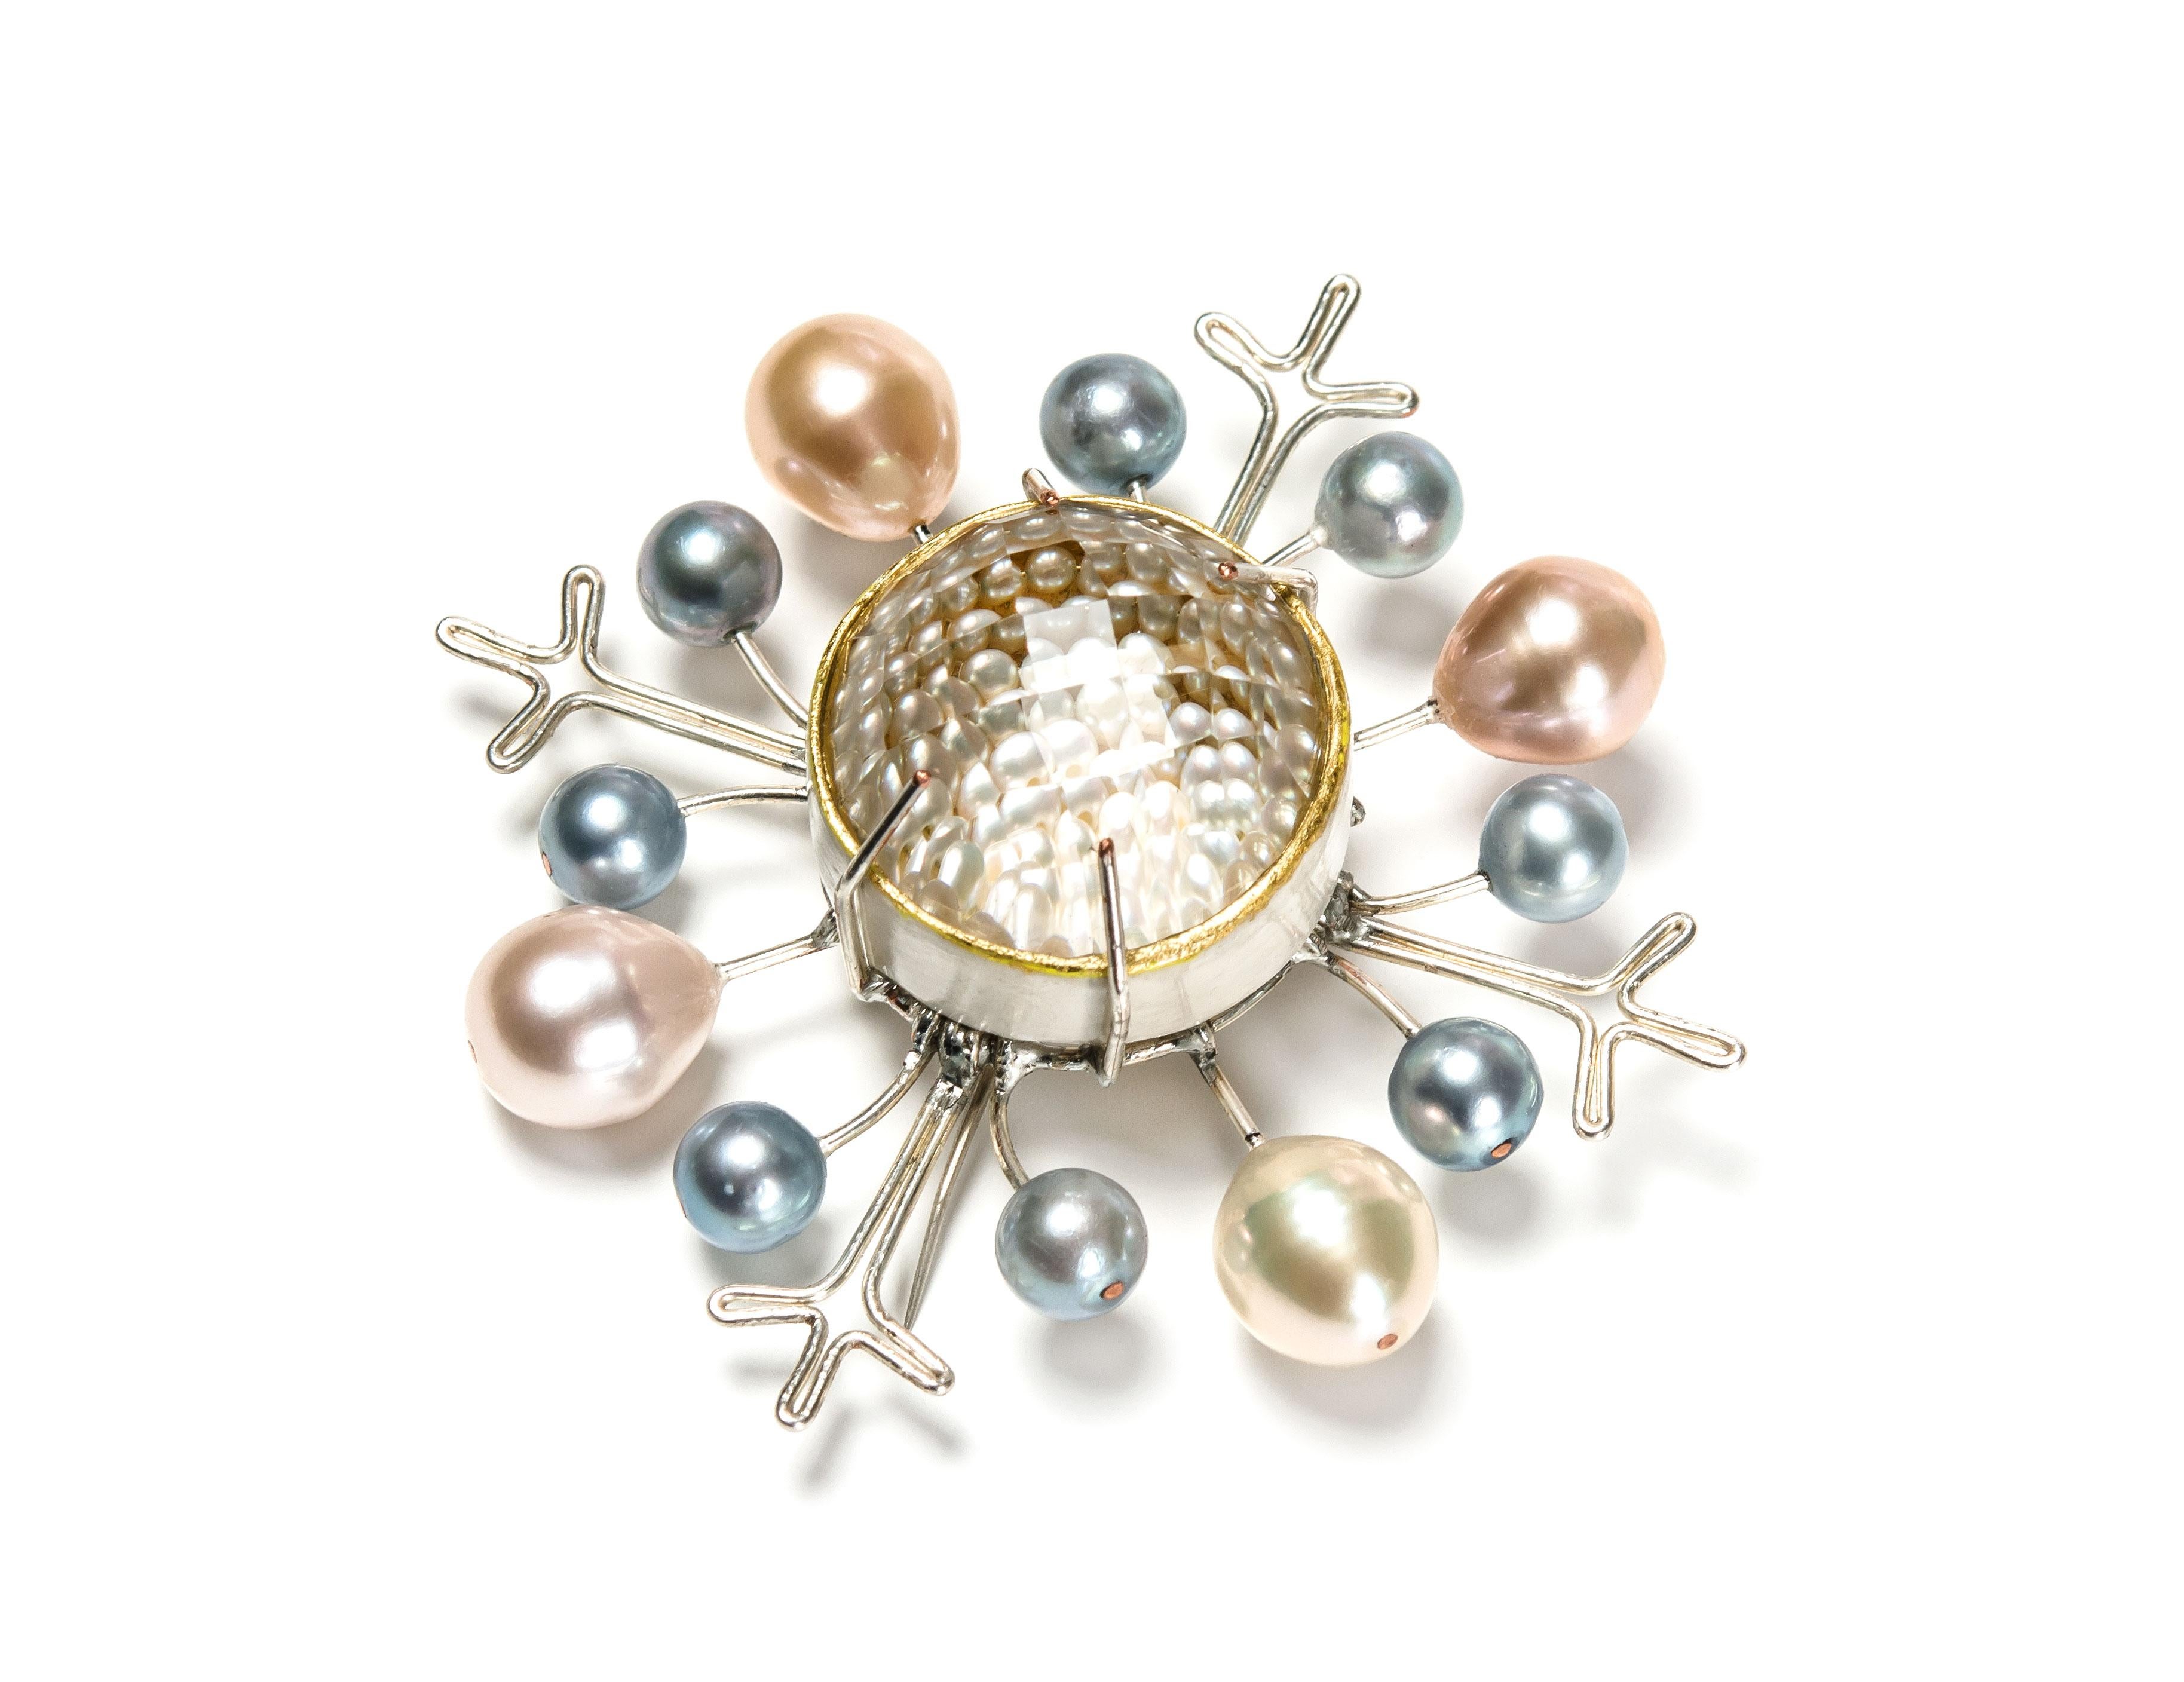 Brooch “Neve”, 2018, is a one-of-a-kind contemporary author jewelry by italian artist Gian Luca Bartellone.
Materials: papier-mâché, silver, silver-plated copper, rock crystal, pearls, gold leaf 22kt.

Great appearance with the lightweight brooch.